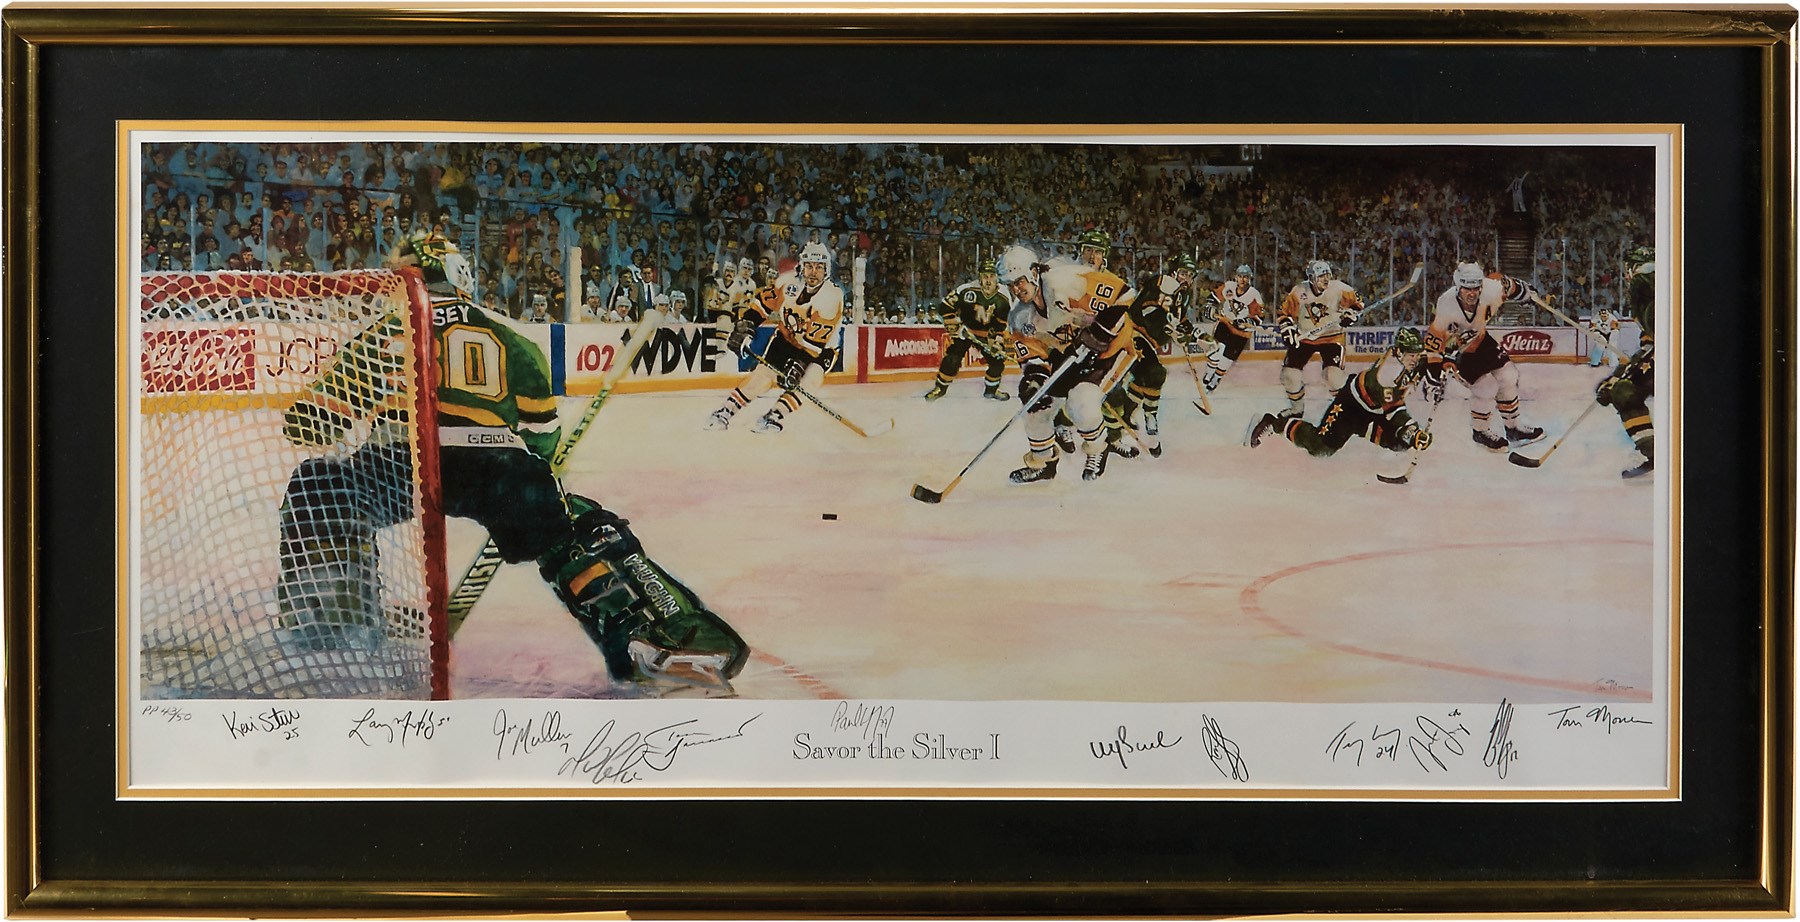 Hockey - 1990-91 Pittsburgh Penguins Stanley Cup Champions Signed Lithograph